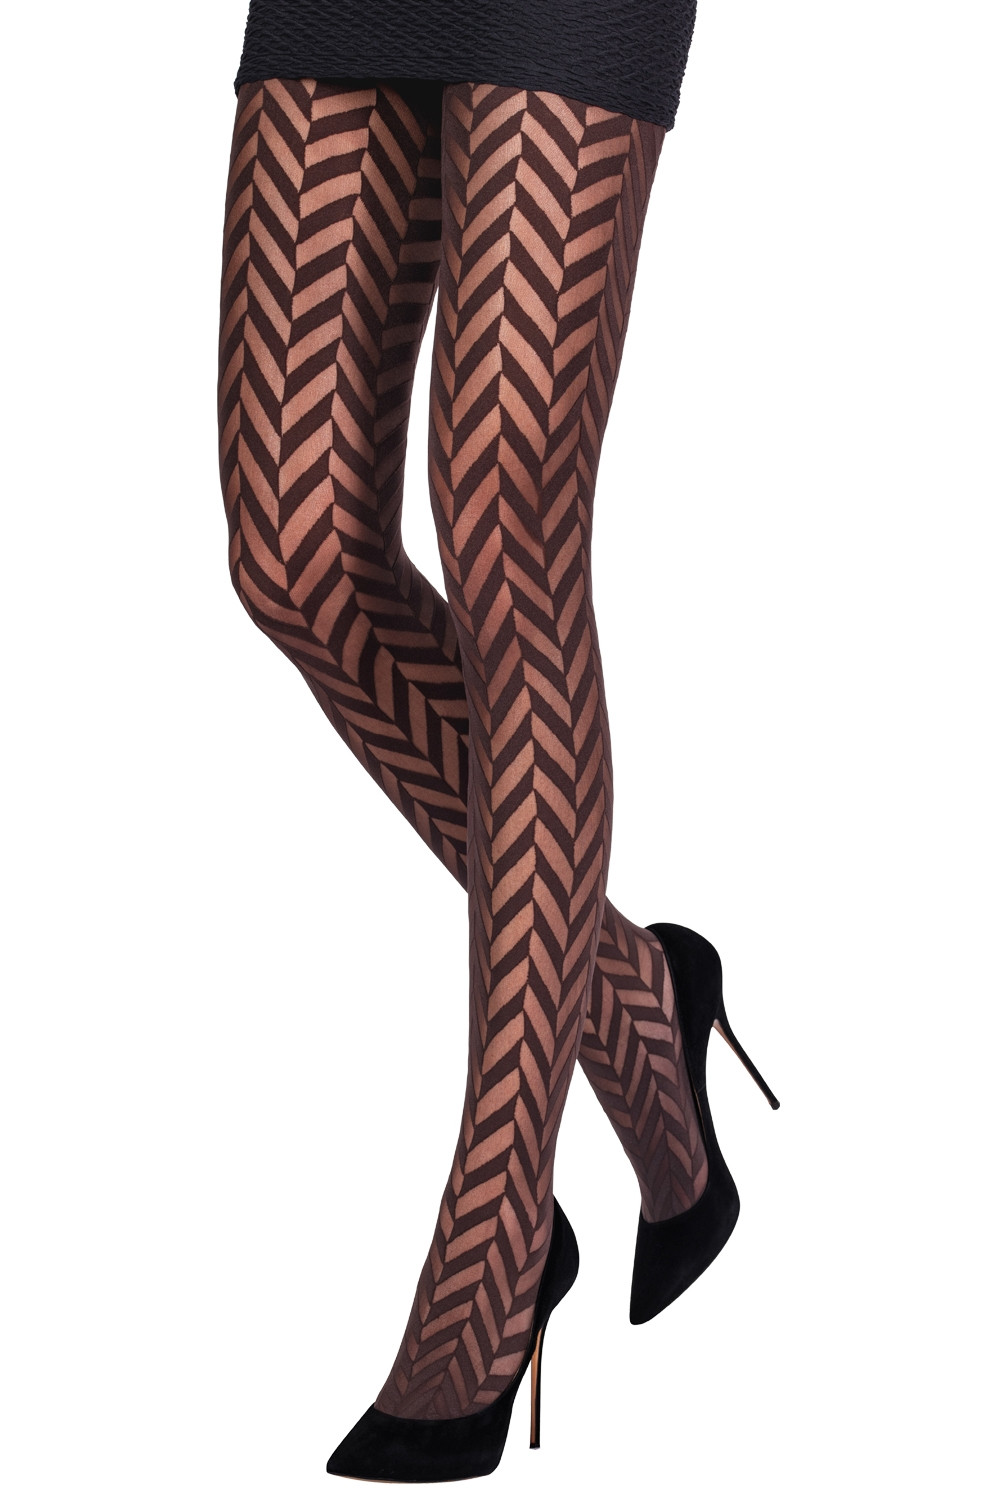 Embossed diamond pattern microfibre tights, Simons, Shop Women's Tights  Online